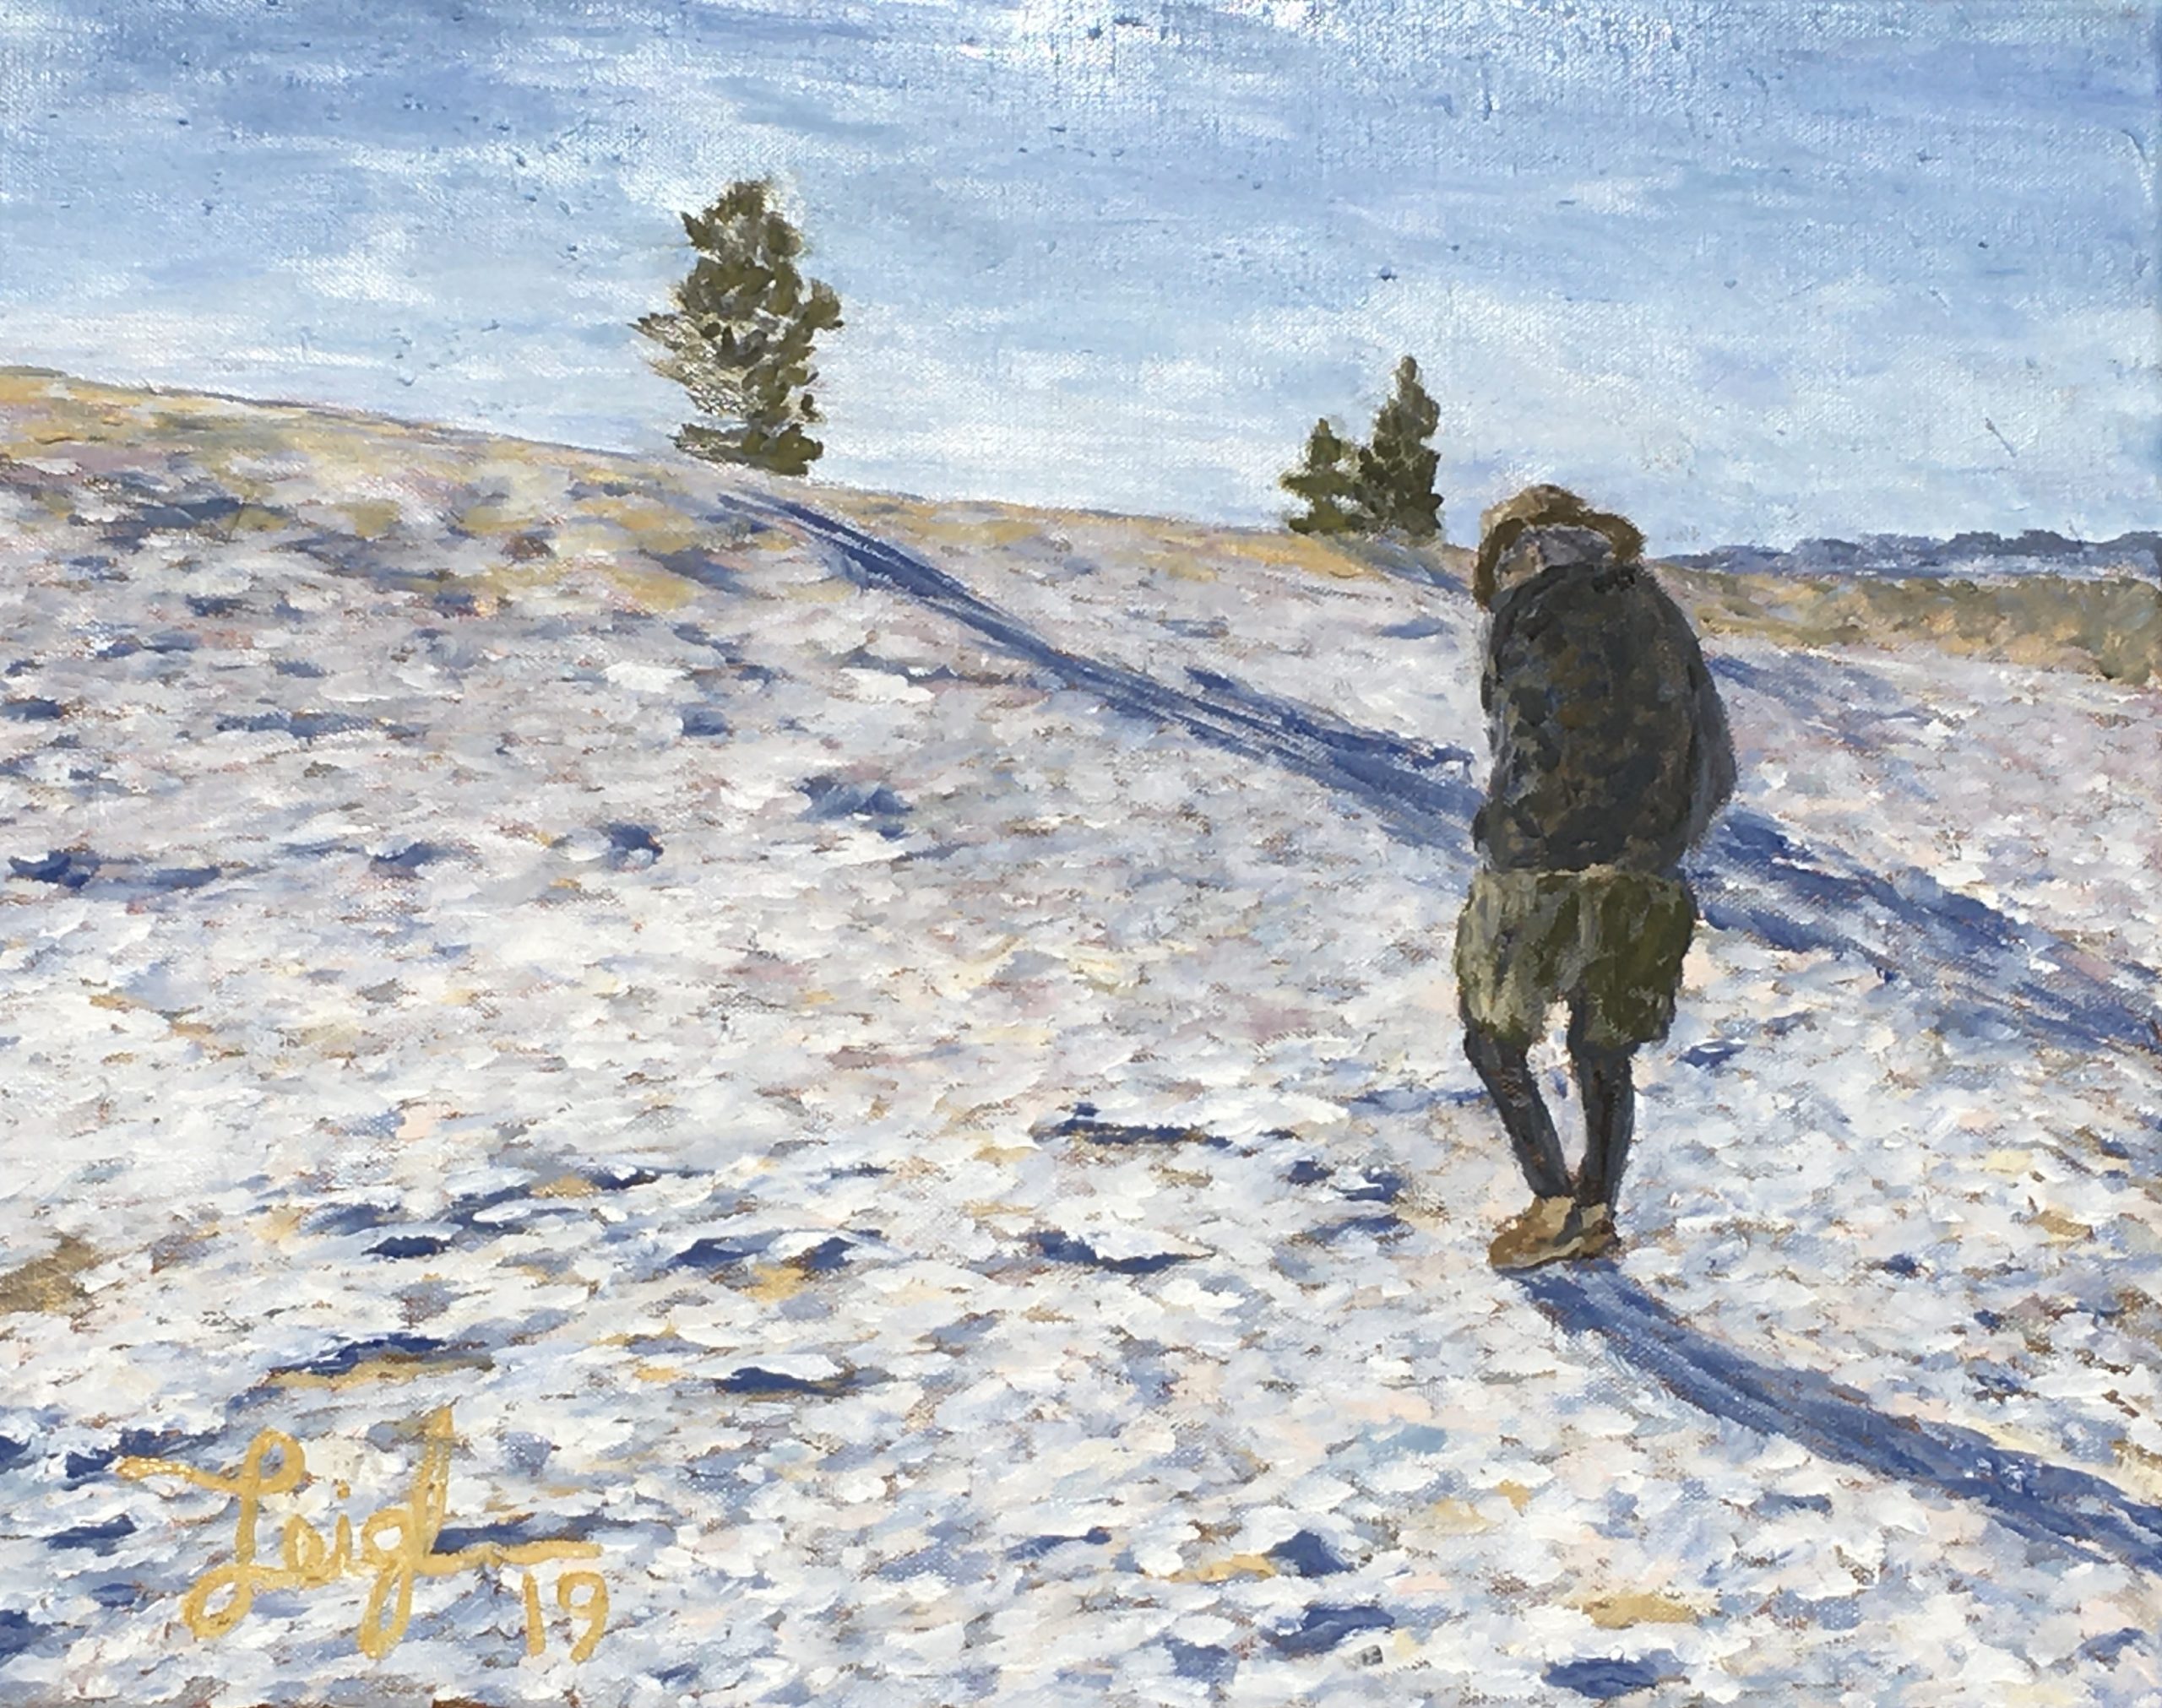 Rory in the Snow  ~  Rory & Louisa Donaldson, Denver, CO  2019  •  20 x 16